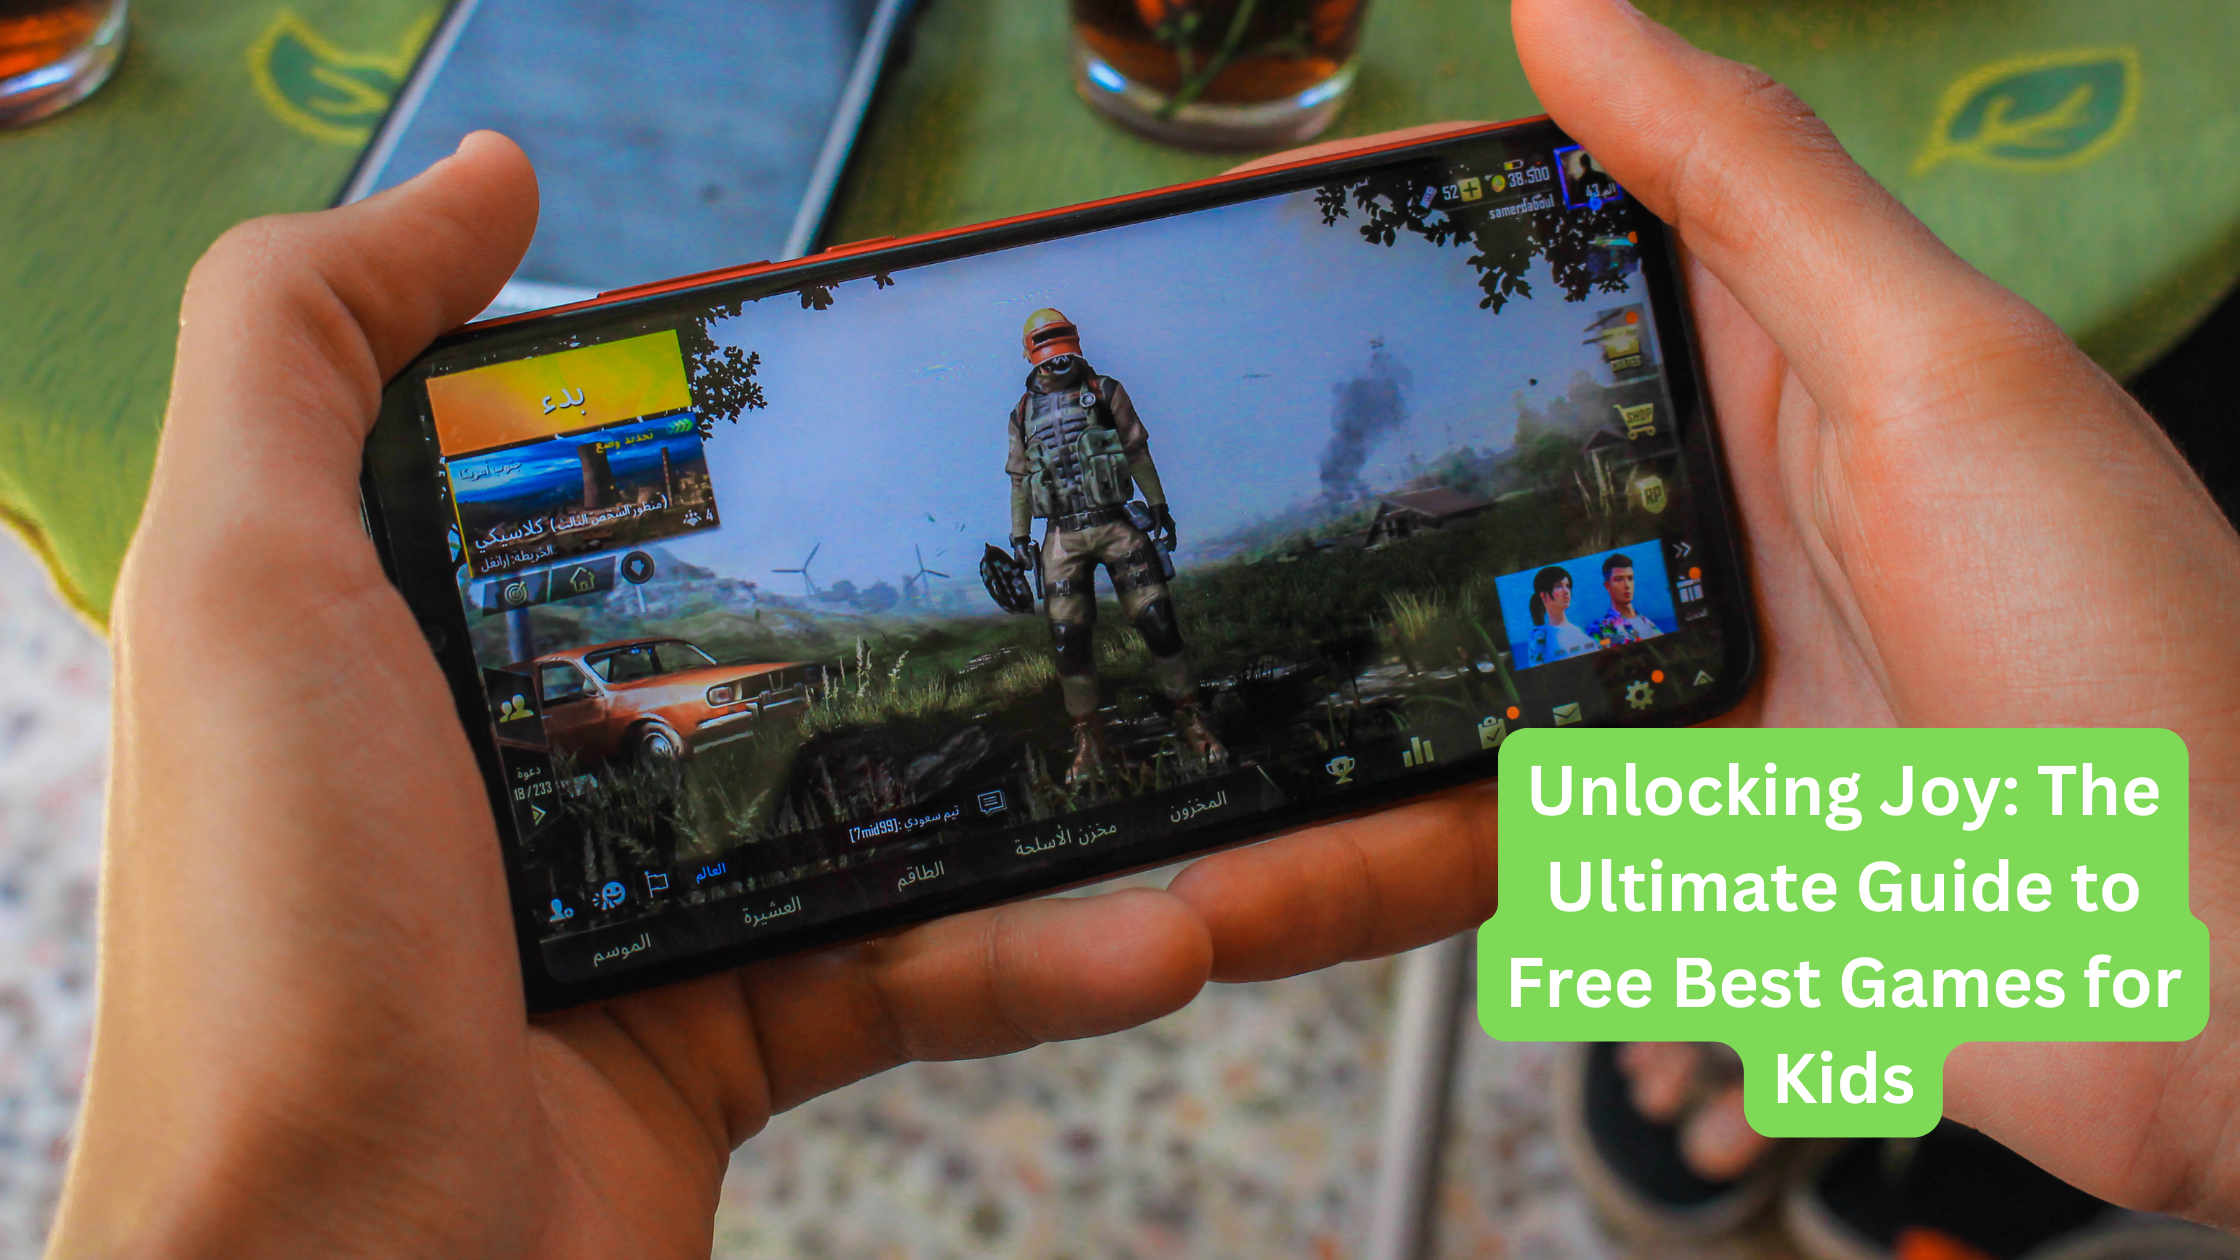 Unlocking Joy: The Ultimate Guide to Free Best Games for Kids